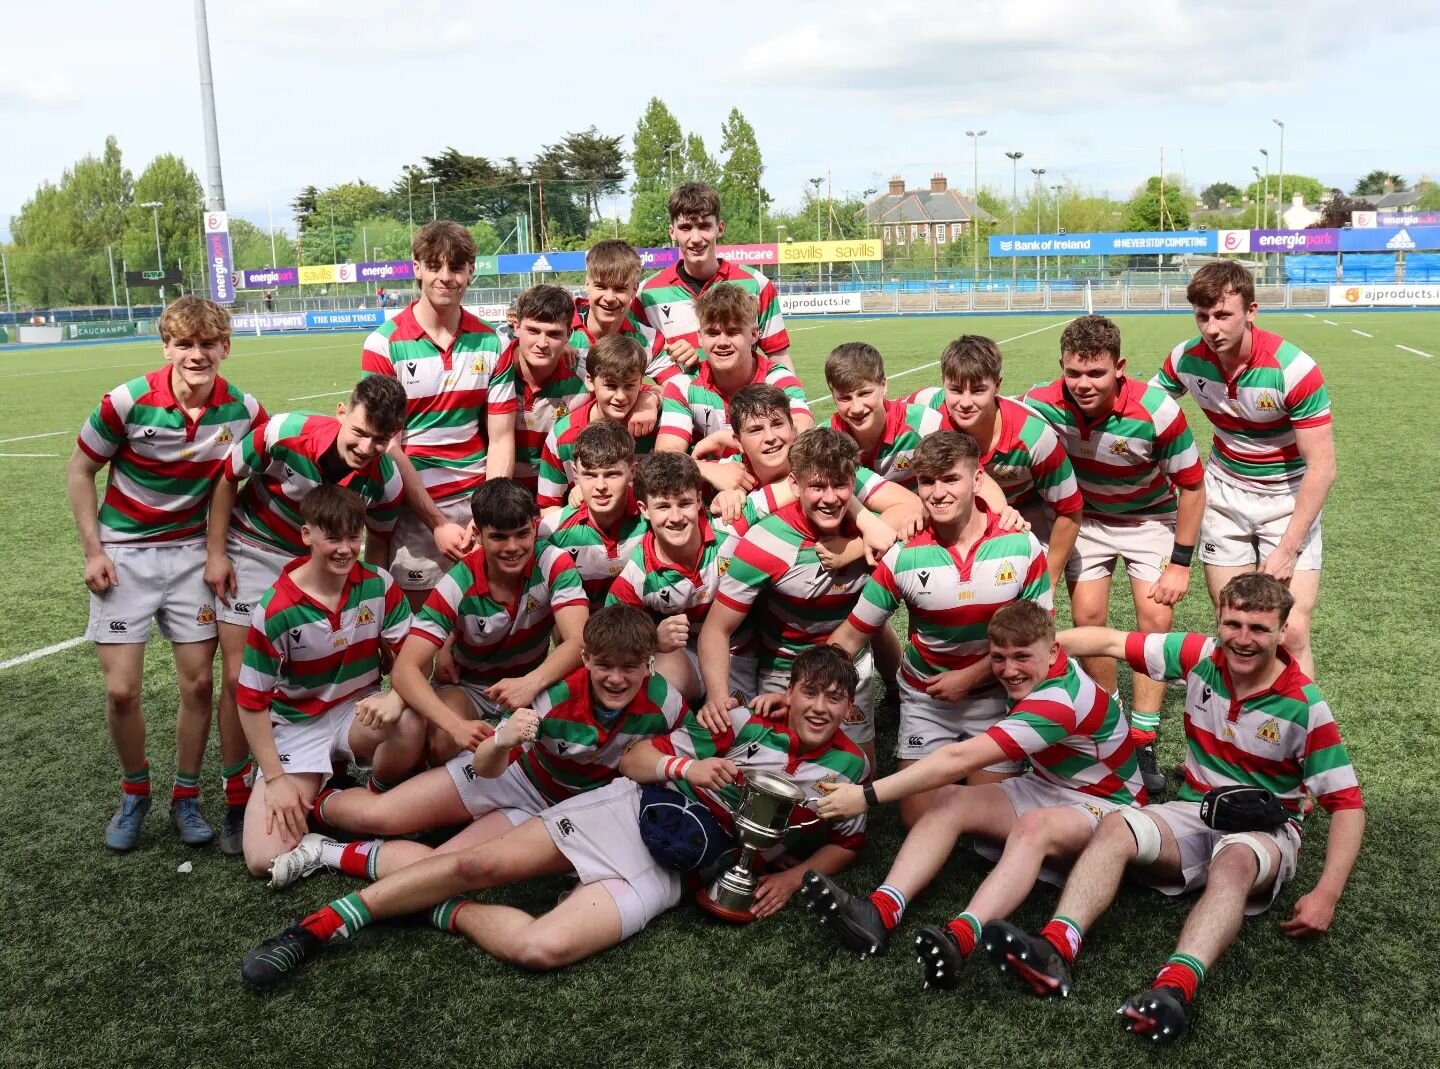 BECTIVE RANGERS UNDER 18's CUP CHAMPIONS 2023!!! 

Bective beat a strong and resilient MU Barnhall team in a close encounter in the cup final. 

Final Score: Bective 18-17 MU Barnhall 

Well done to team captain Ernie O'Brien and other players playin